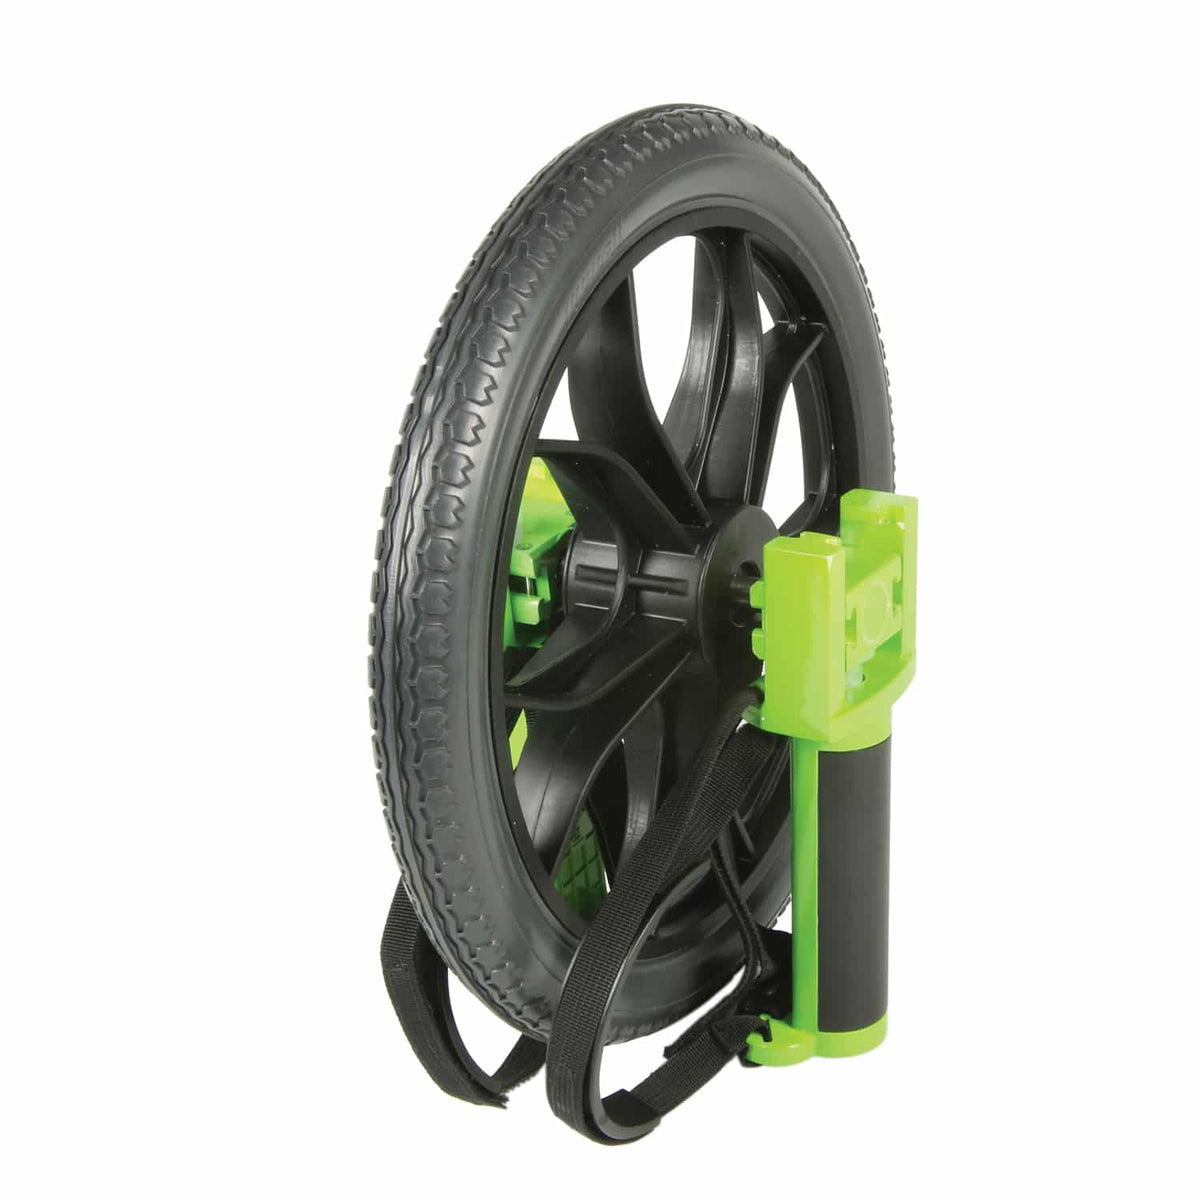 Prism Fitness Smart Core Ab Wheel With Mat folded view | Fitness Experience